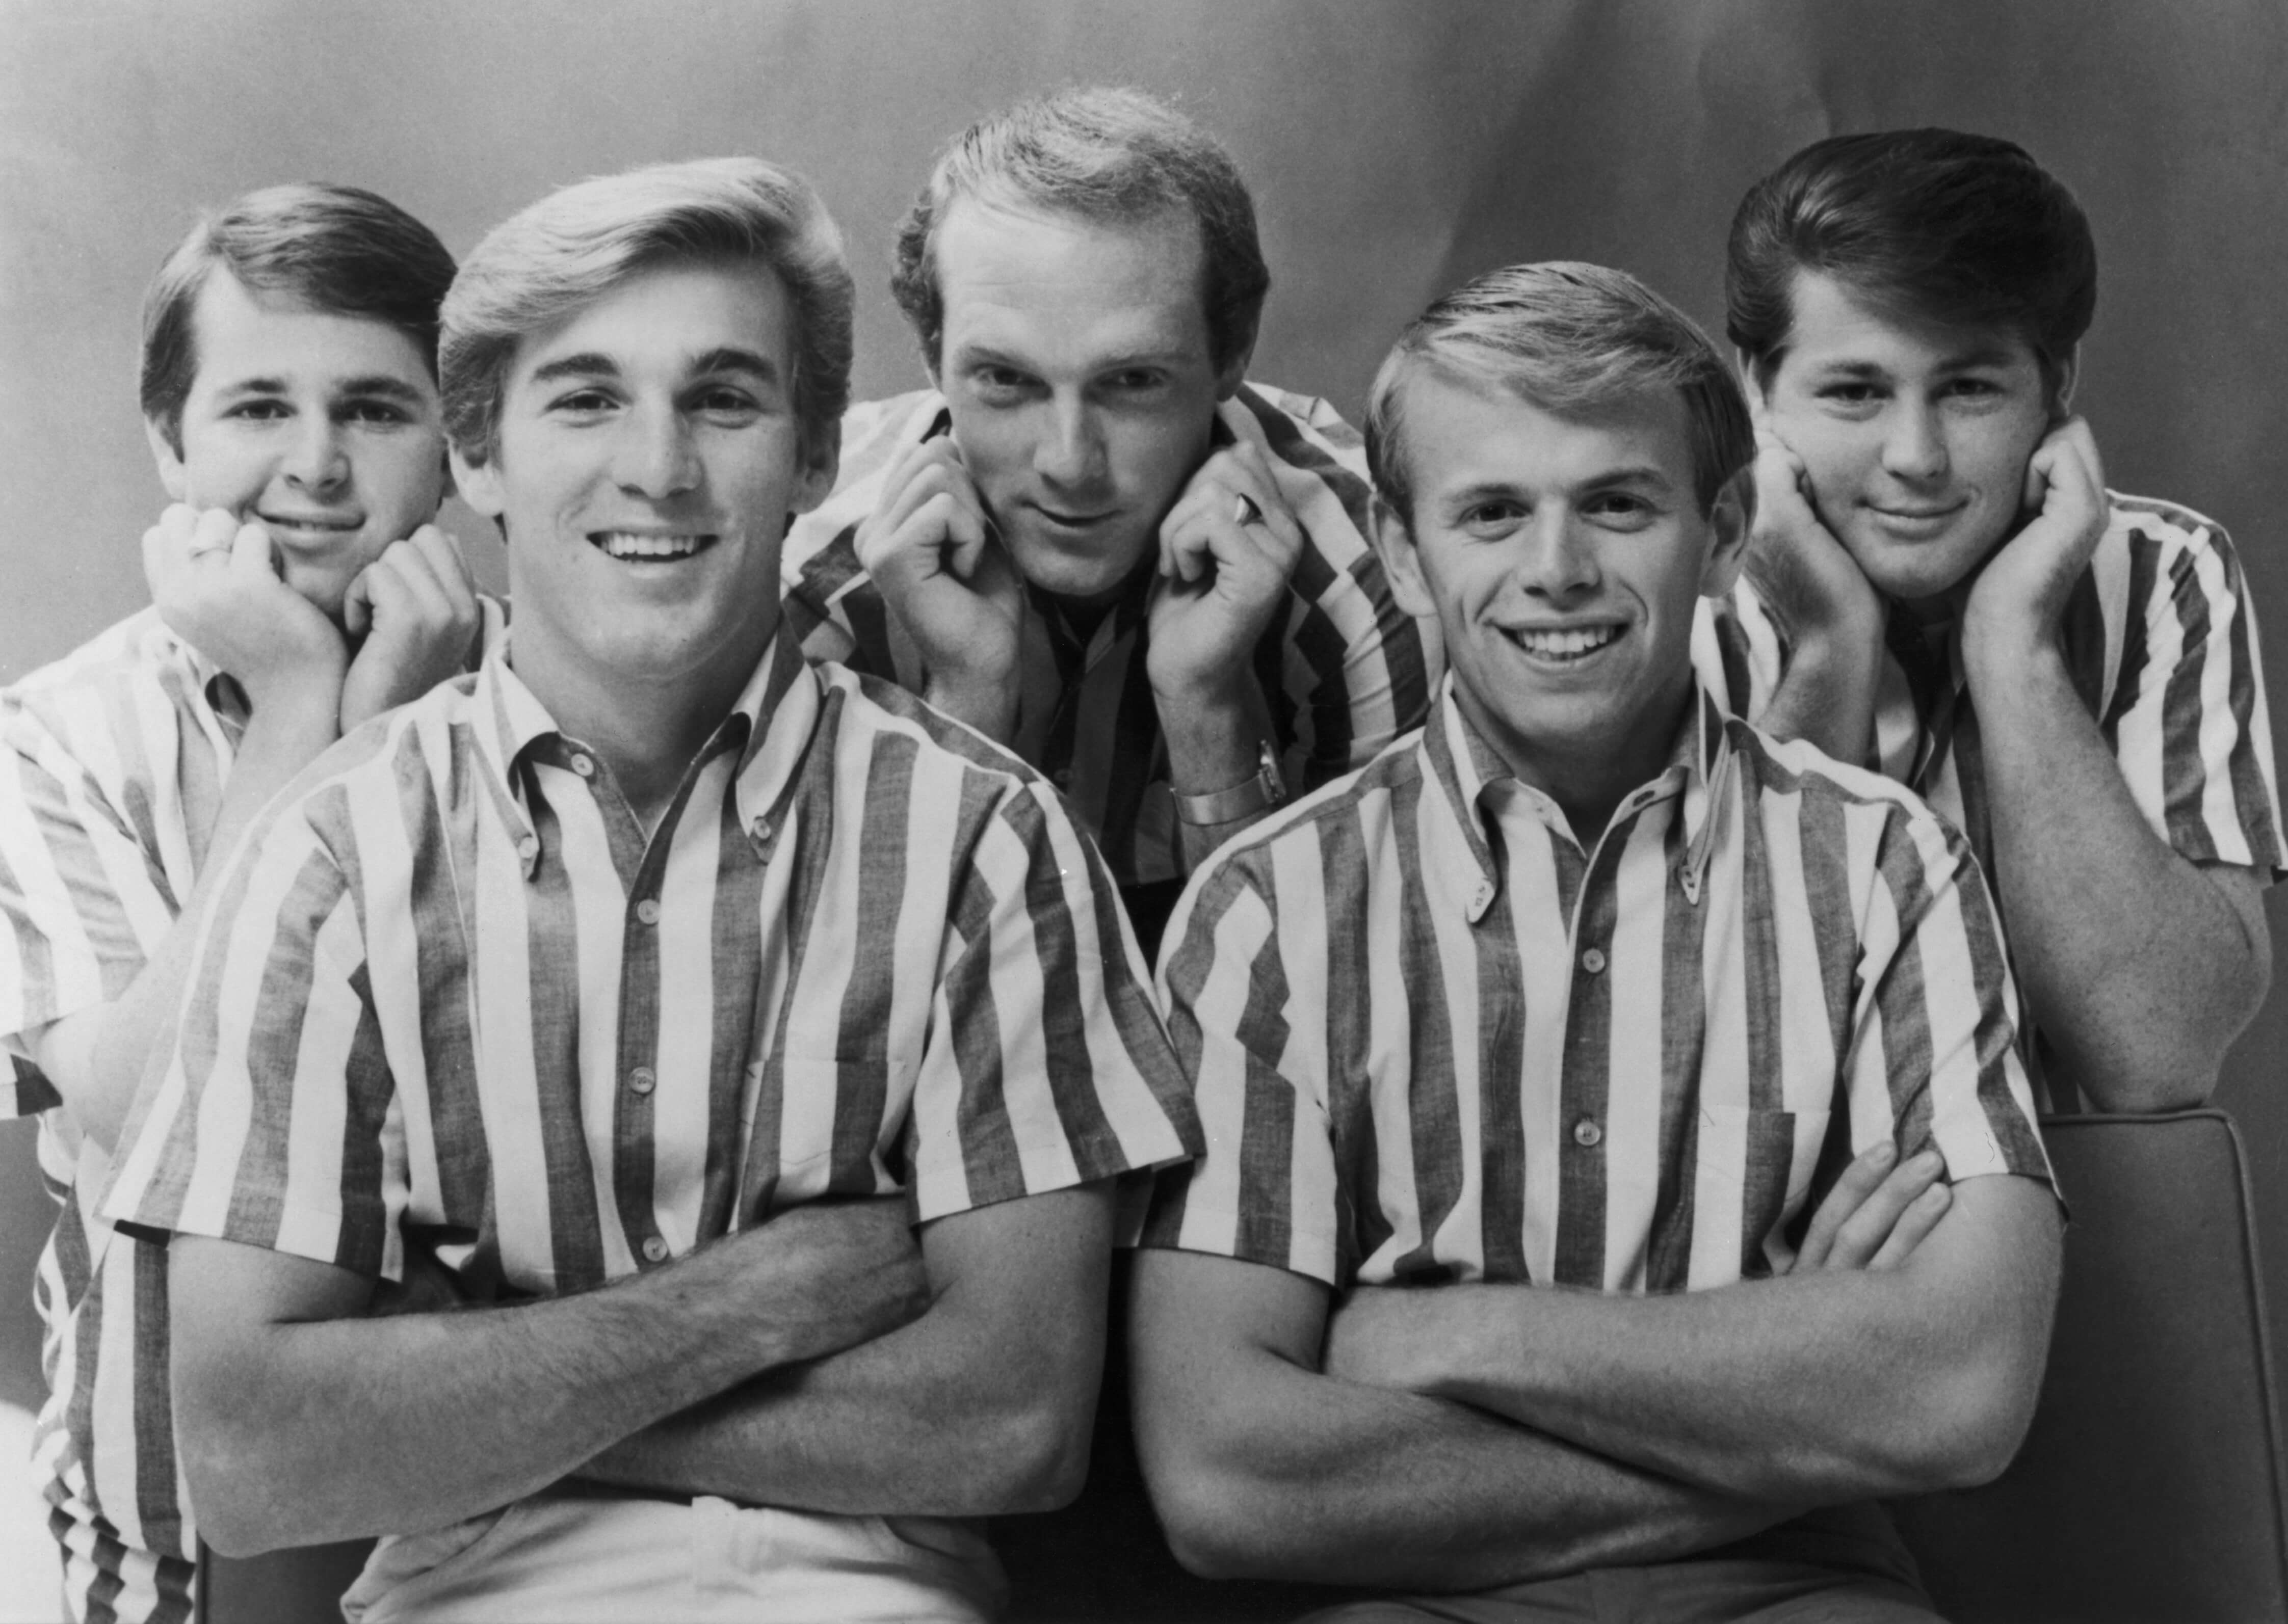 The Beach Boys during the "Don't Worry Baby" era in black-and-white